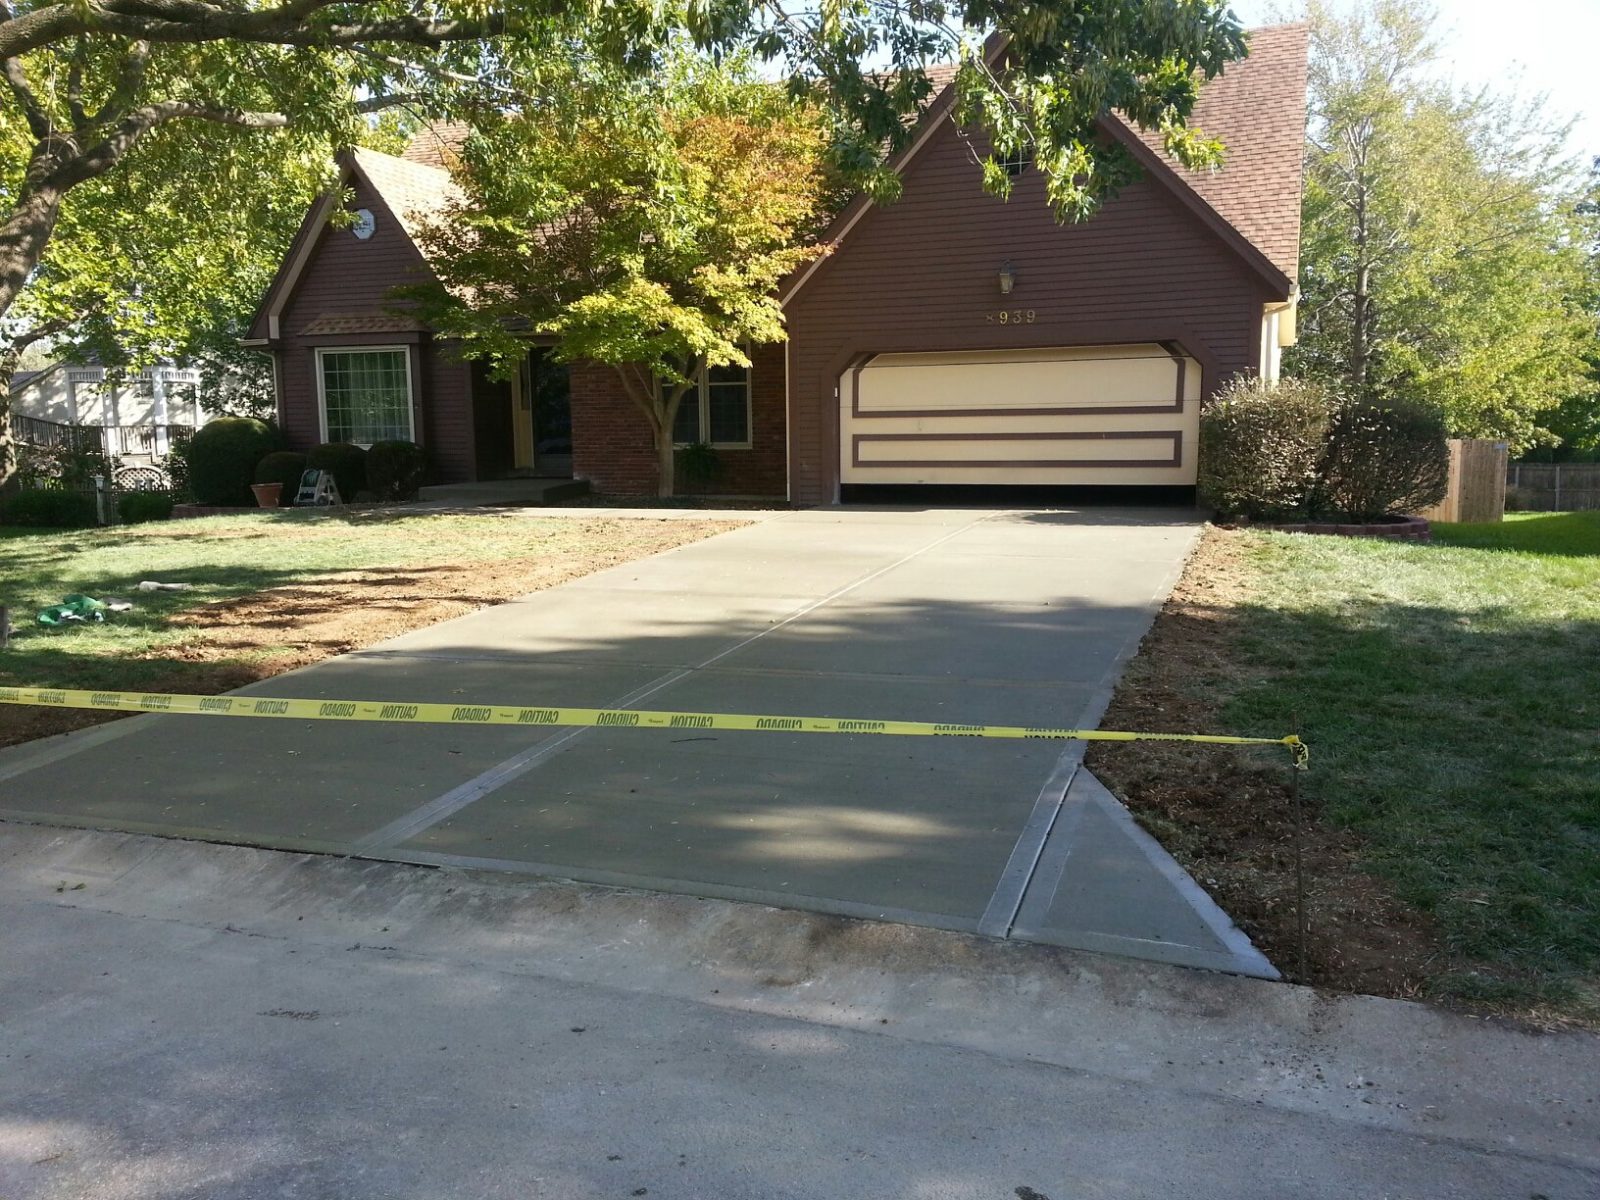 Driveway Needs to be Replaced